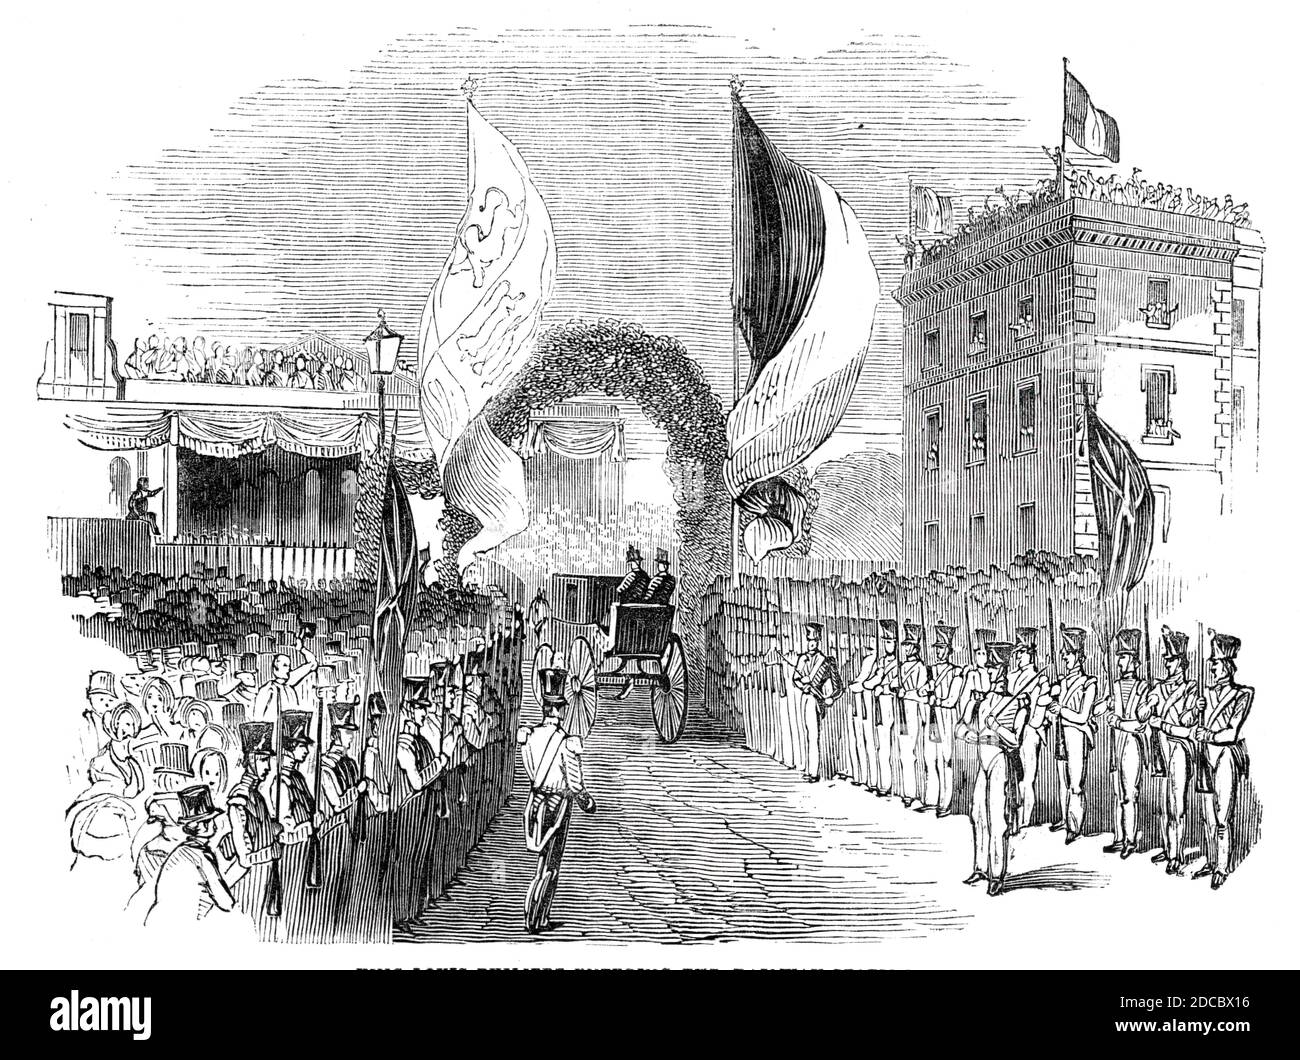 King Louis Philippe entering the railway station, 1844. Visit of the French king Louis Philippe to Britain: 'The train started from Gosport with the King, Prince Albert, and the distinguished personages who accompanied them, at eleven o'clock, and arrived at Farnborough station at half-past twelve o'clock, where carriages were in waiting, in which they immediately went off at a rapid pace towards Windsor [Castle]'. From &quot;Illustrated London News&quot;, 1844, Vol I. Stock Photo